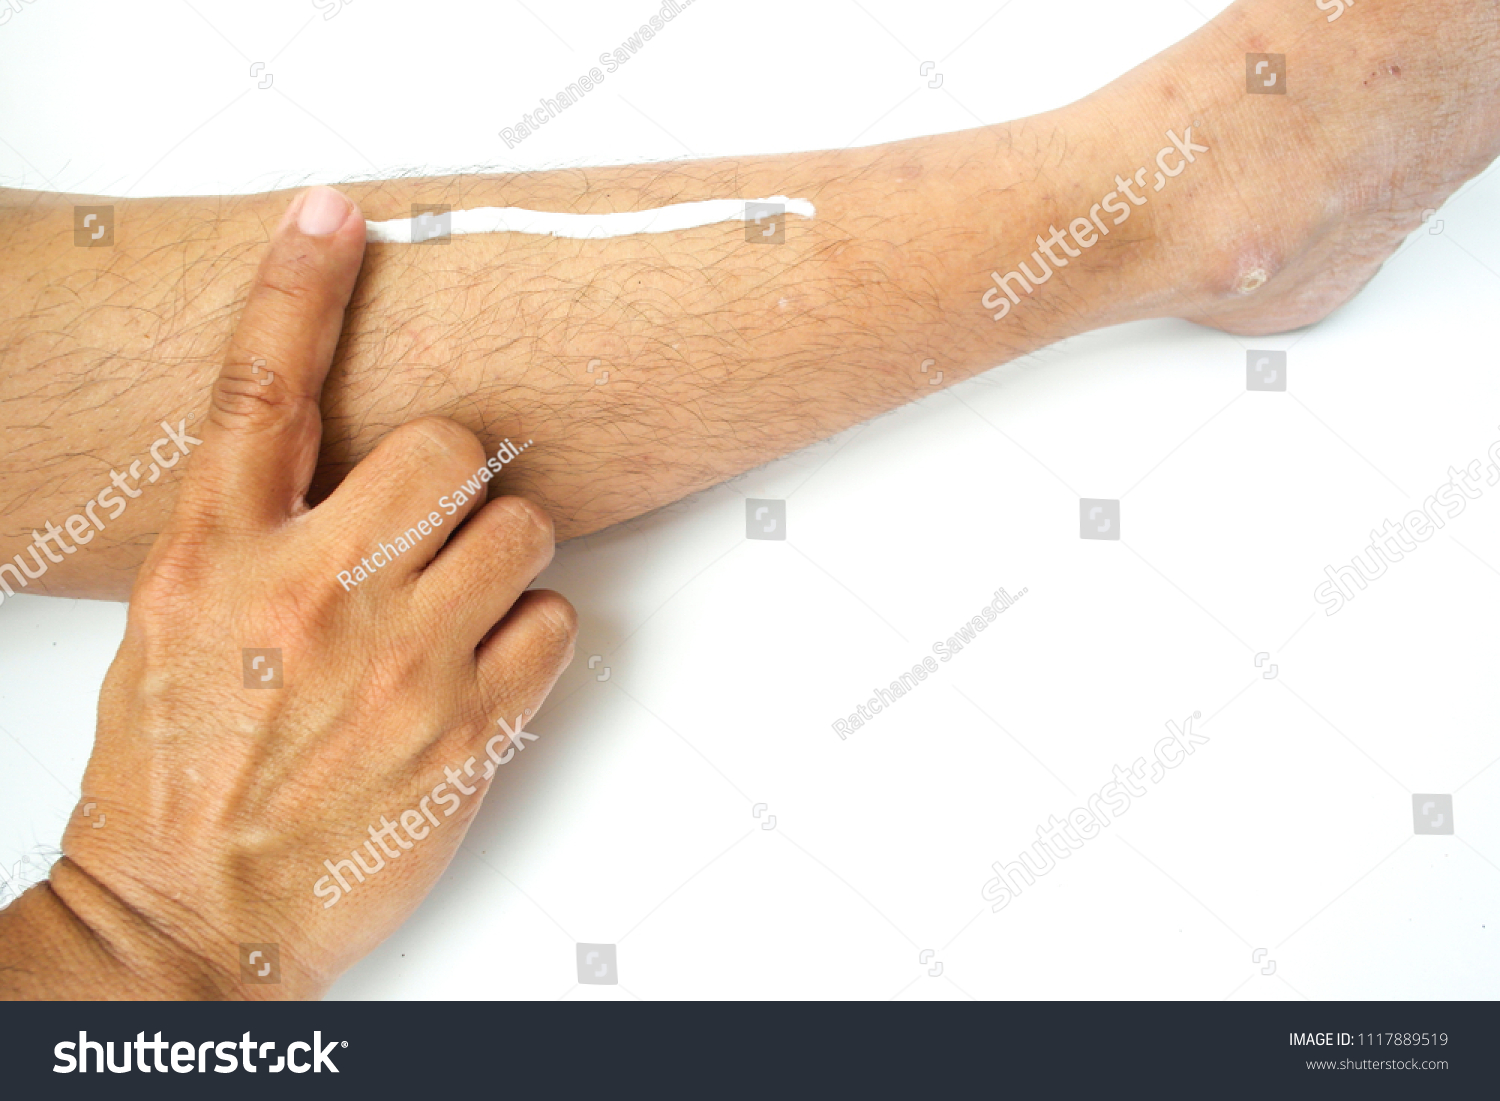 Asian man use his fingers to apply white cream on his leg #1117889519